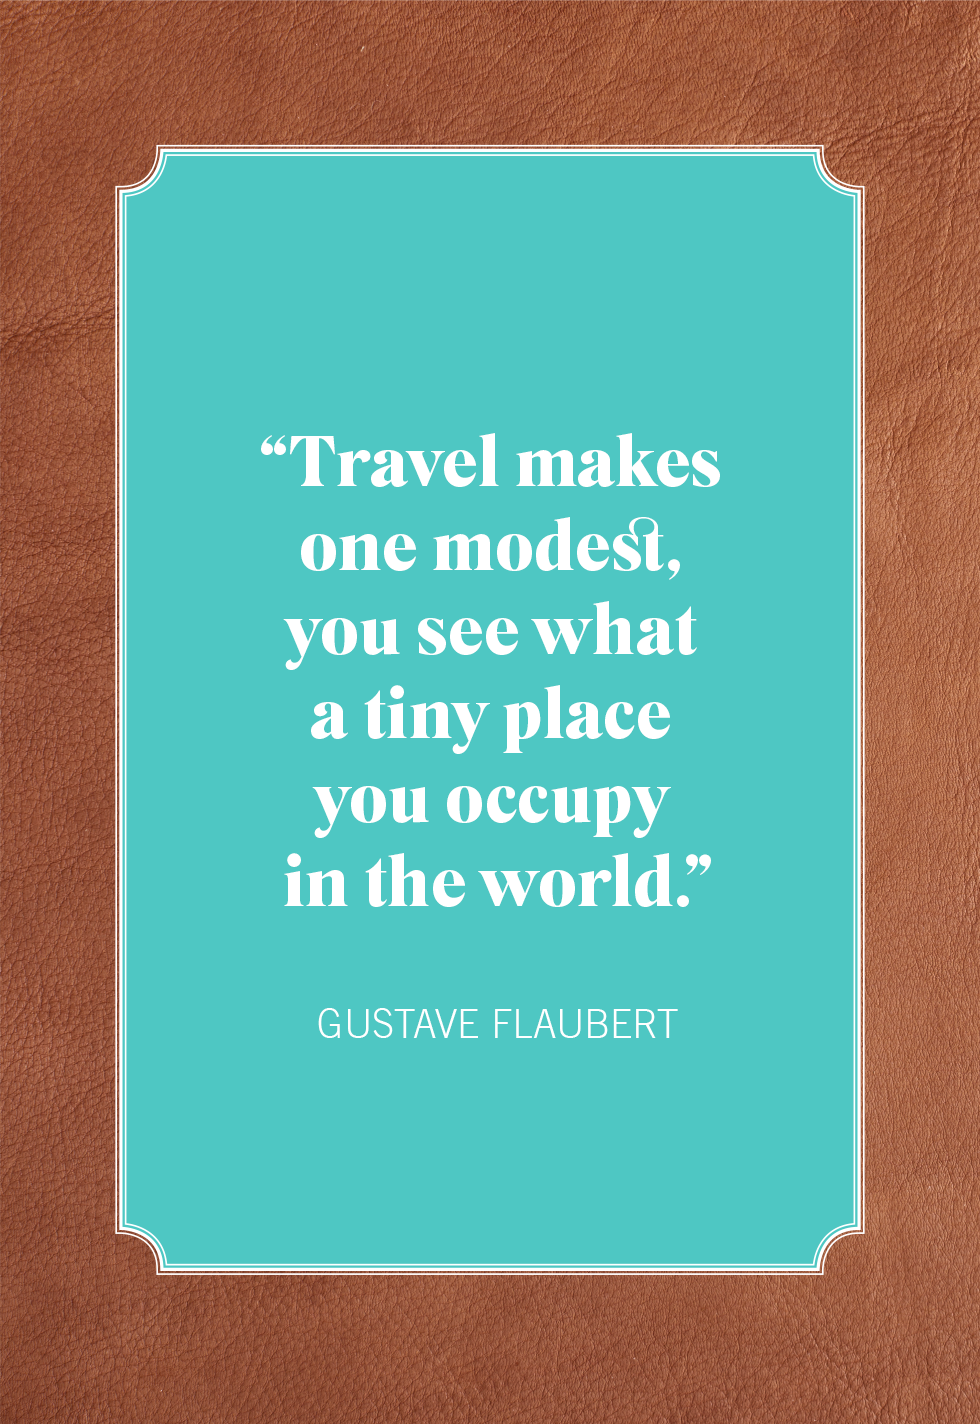 20 Best Travel Quotes - Inspiring Quotes About Travel